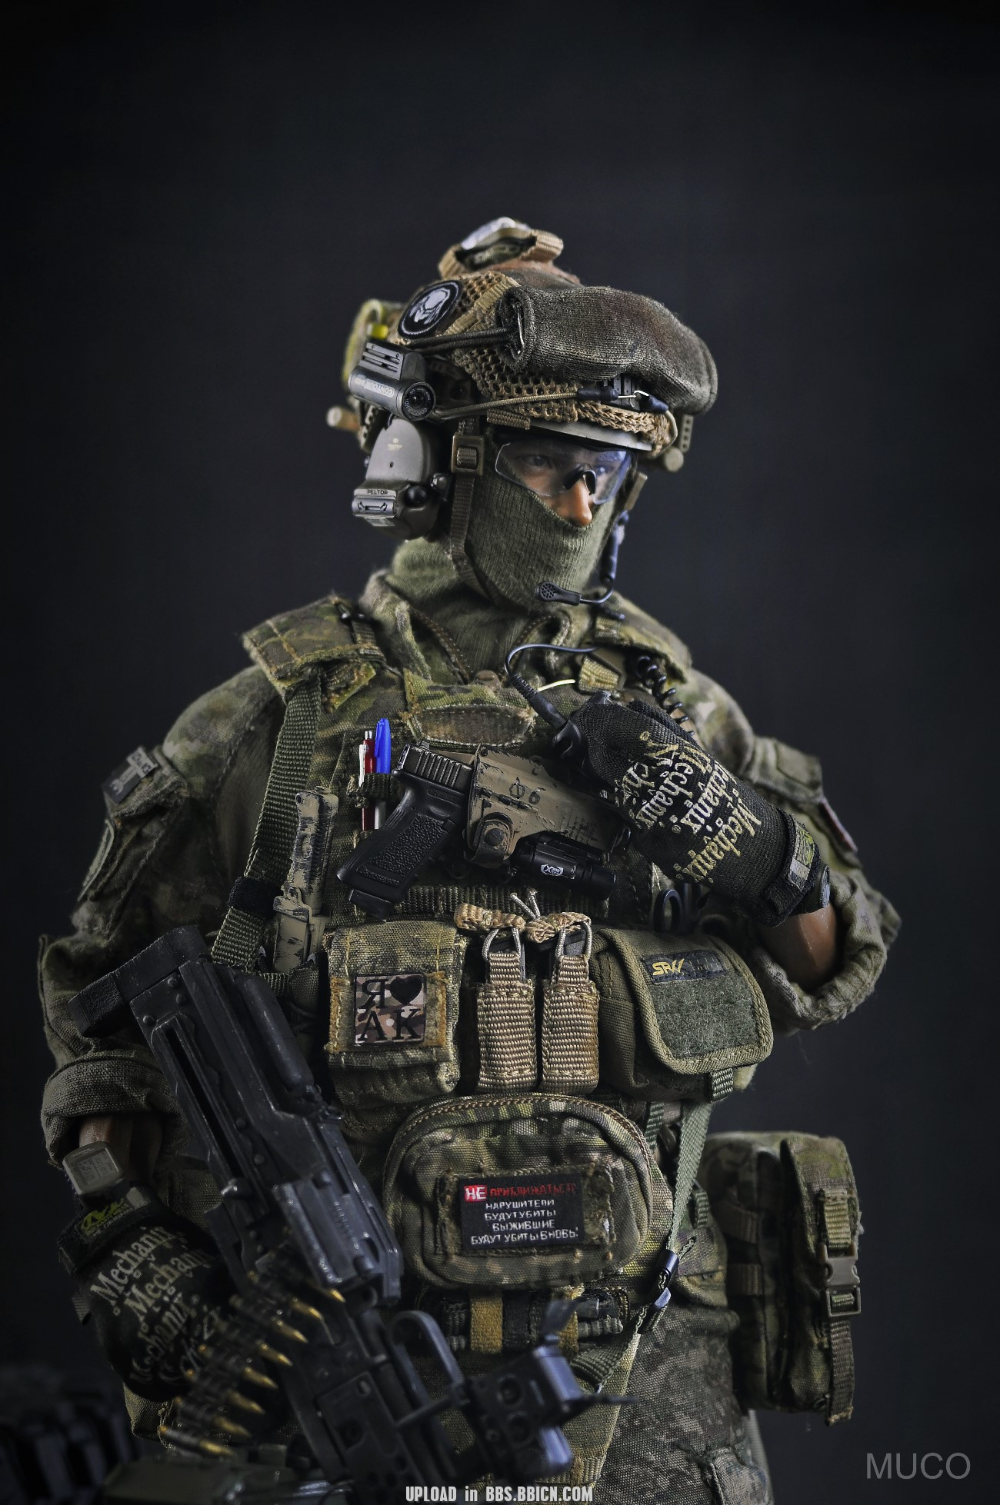 MUCO SPETSNAZ FSB ALPHA GROUP PKP Machine Gunner 2.0 Soldier Online BBICN Powered By D. Special Forces Gear, Indian Army Special Forces, Military Action Figures